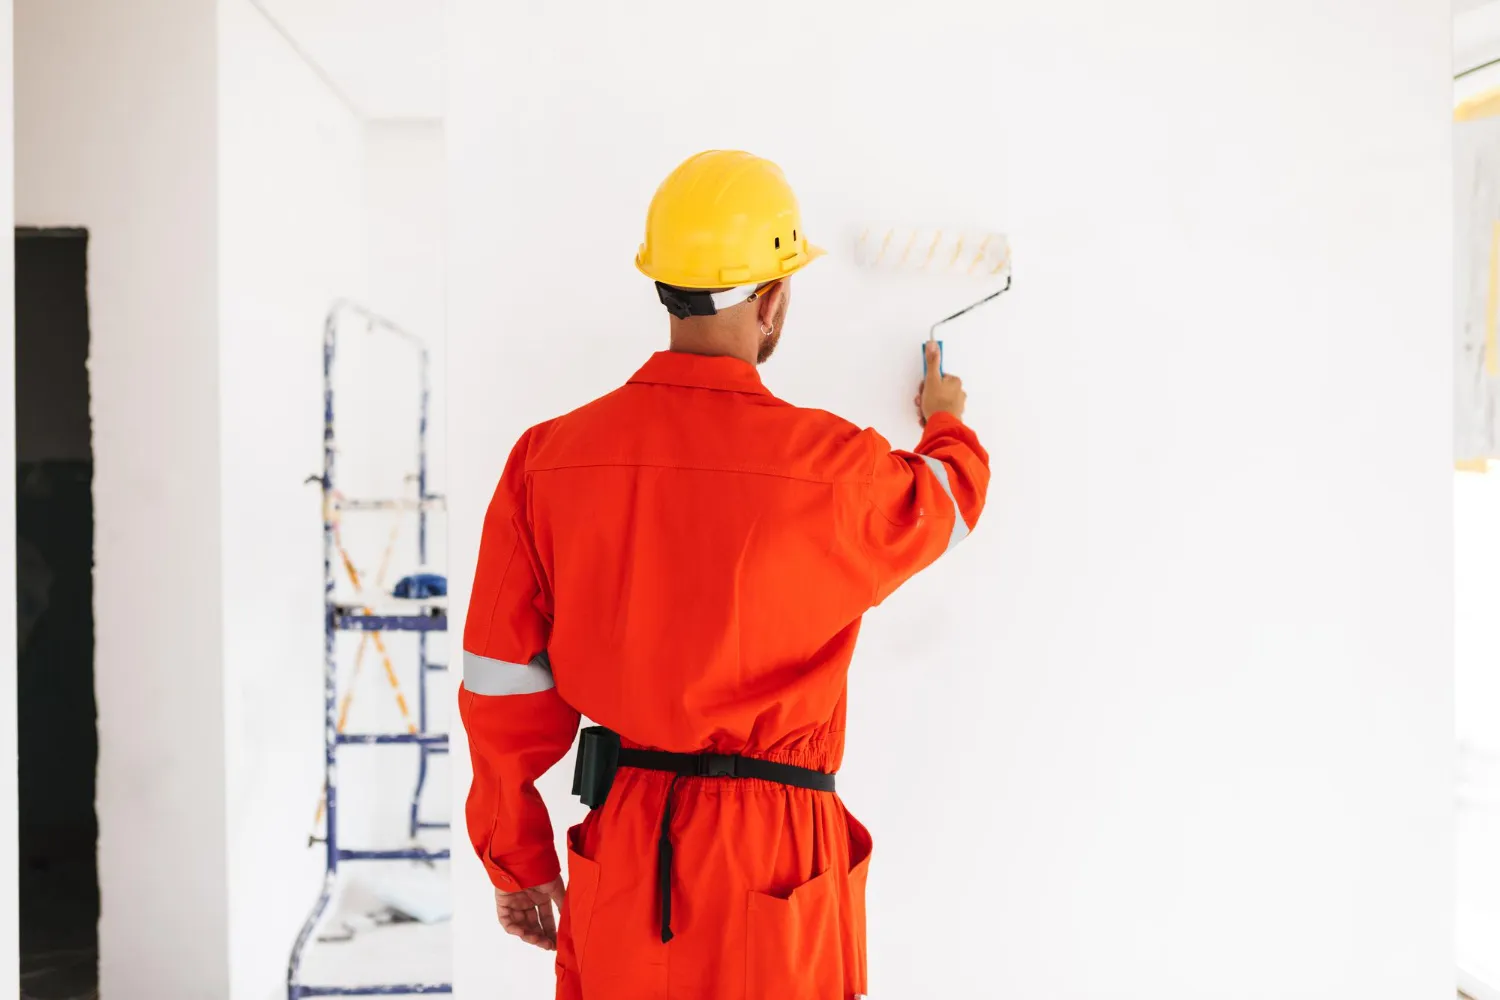 residential painting services